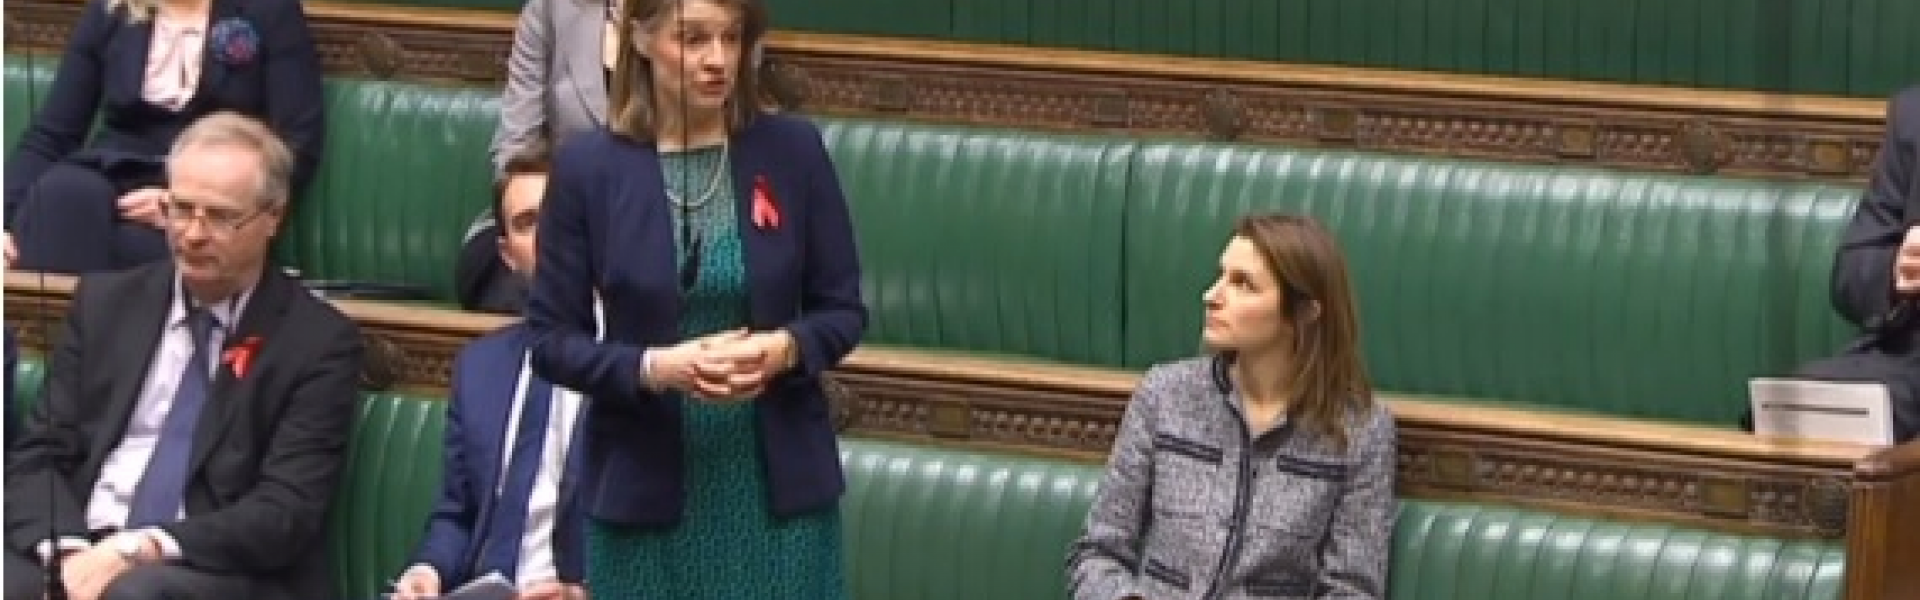 Rachel Maclean, MP for Redditch County, today took the next steps in her campaign to get more peak time express train services from Redditch by raising the issue with the Rail Minister.